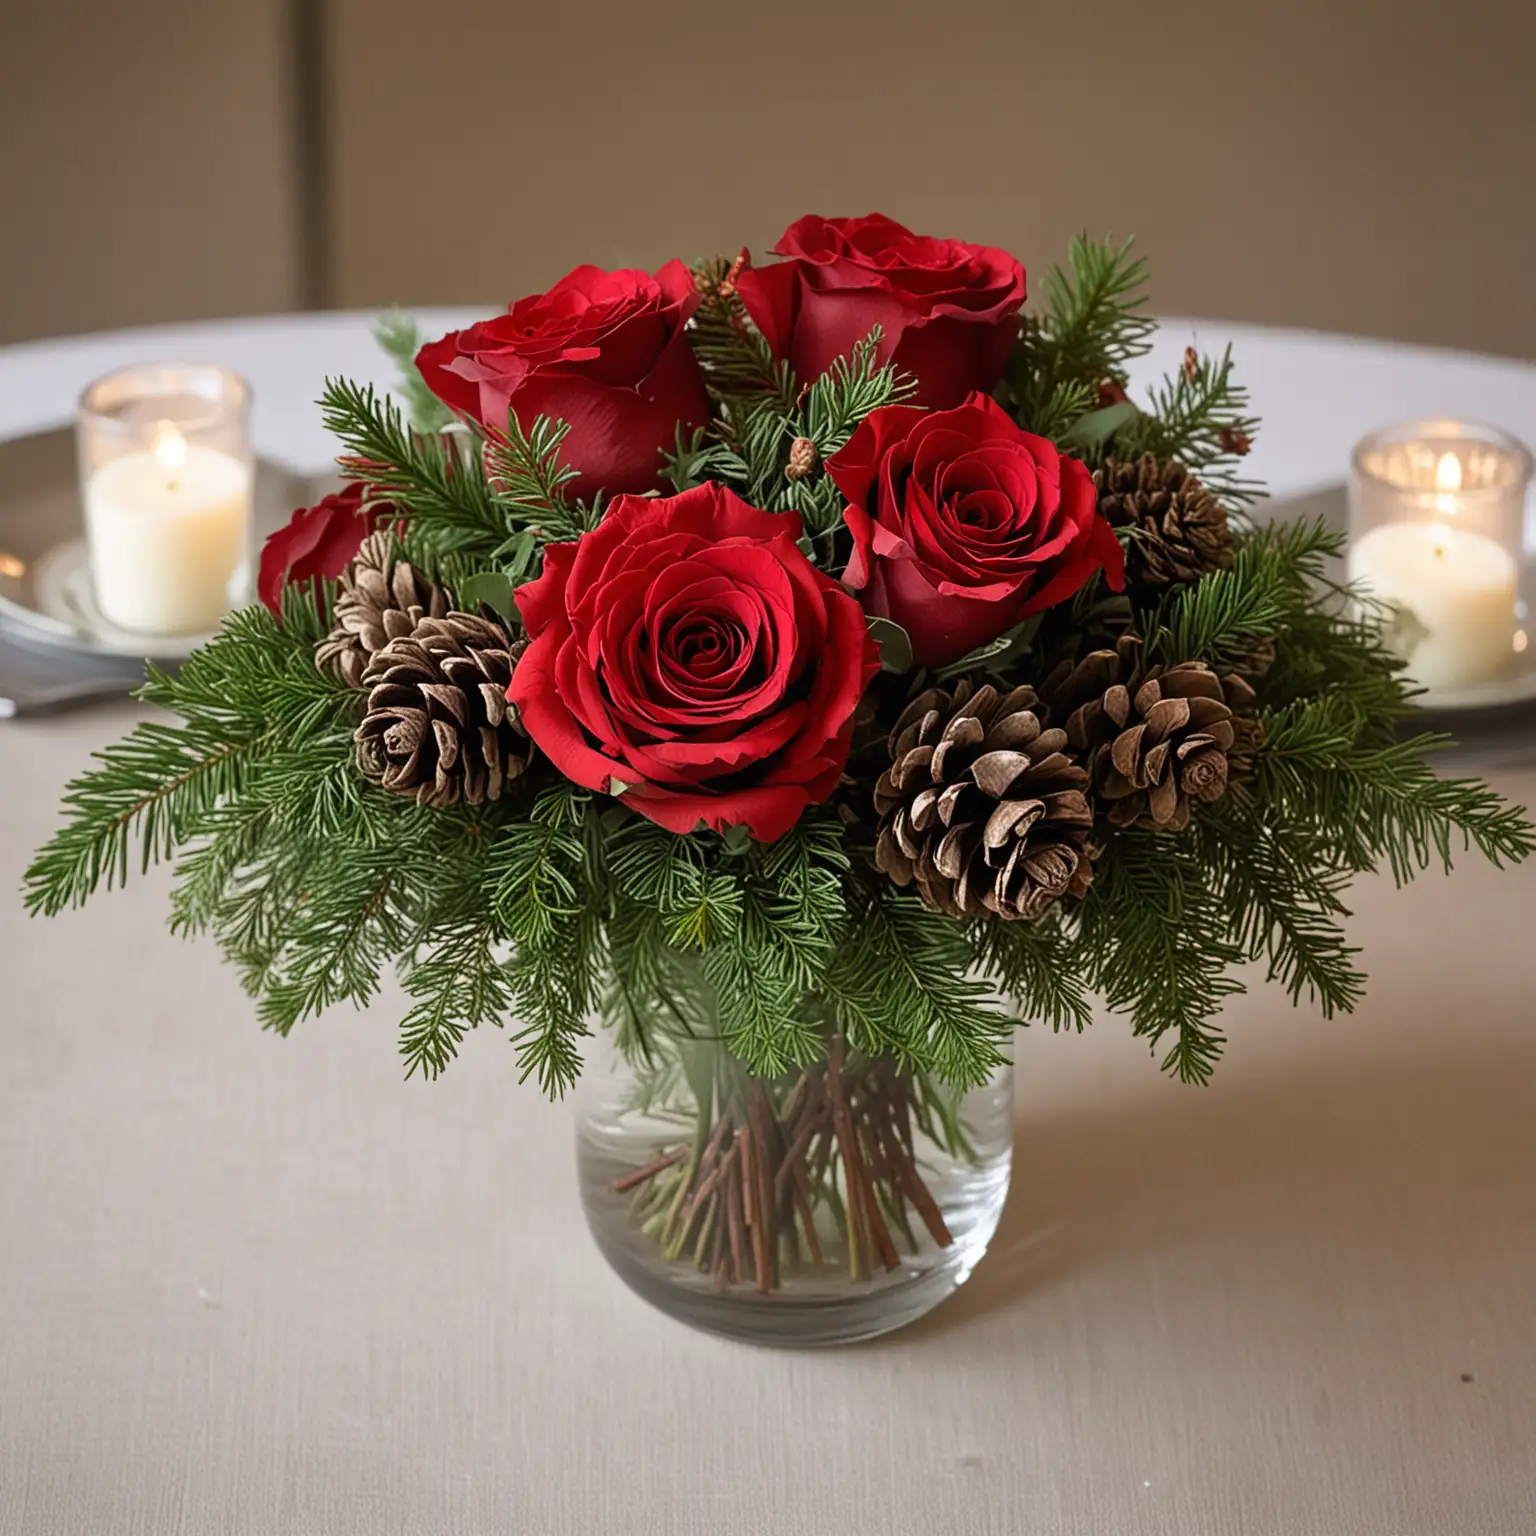 simple elegant wedding centerpiece with red roses for a winter wedding using evergreen and pinecones